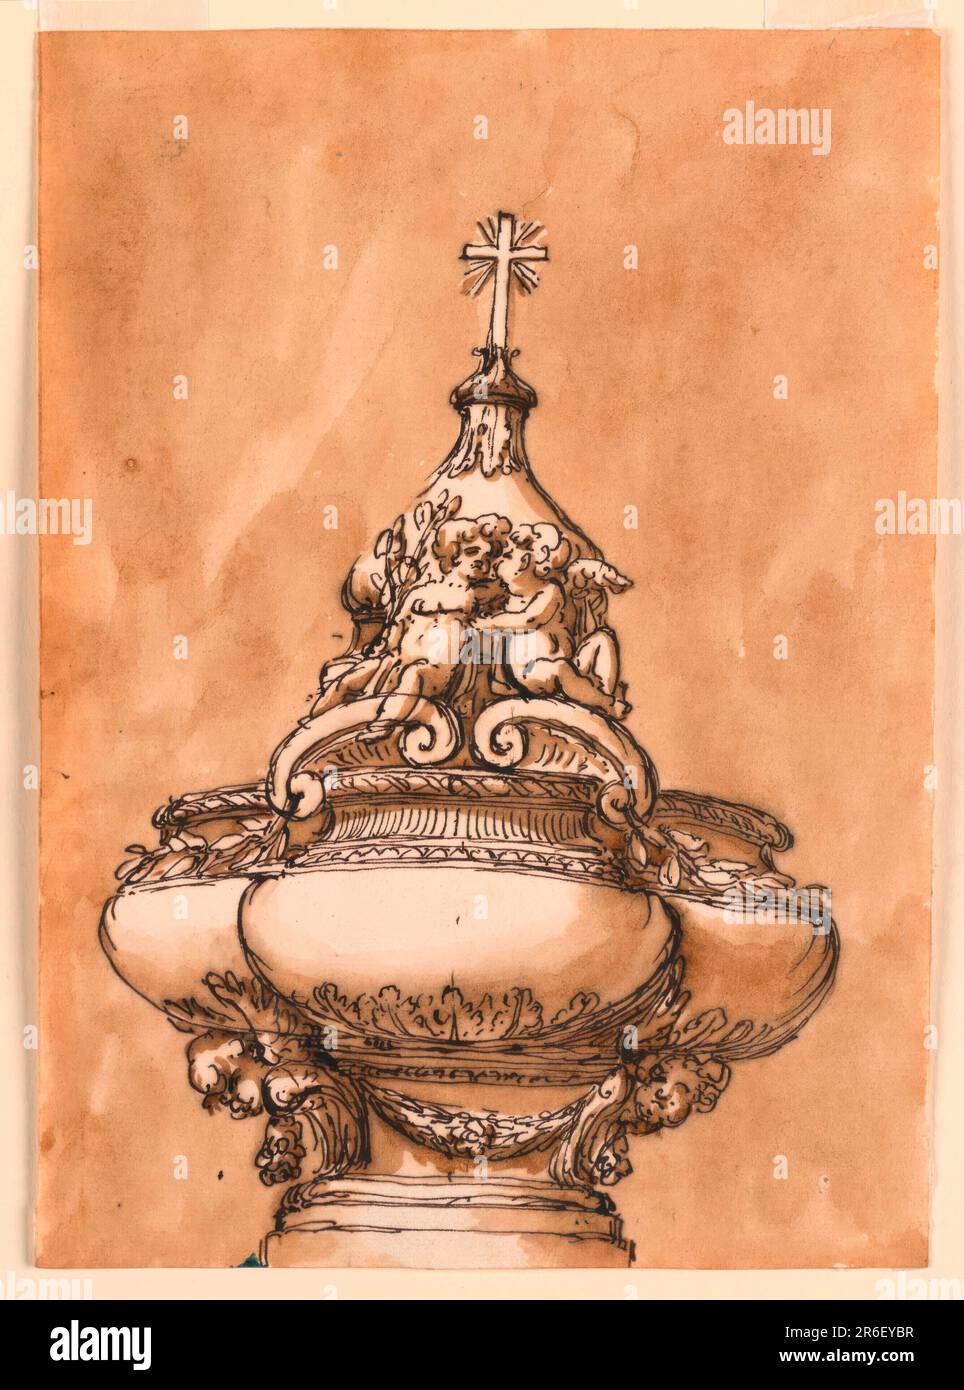 The plan of the bowl resembles a quatrefoil. Below is a round base and a short shaft, with a festoon supported by two cherubim. The lid has, below, moldings and two pediment volutes at the front upon which two angels sit embracing each other, the left one holding in his right hand flower stems. In the center is an onion-shaped cupola with a cross on top. Usual background. Date: ca. 1775. Pen and brown ink, brush and brown wash on lined off-white laid paper. Museum: Cooper Hewitt, Smithsonian Design Museum. Stock Photo